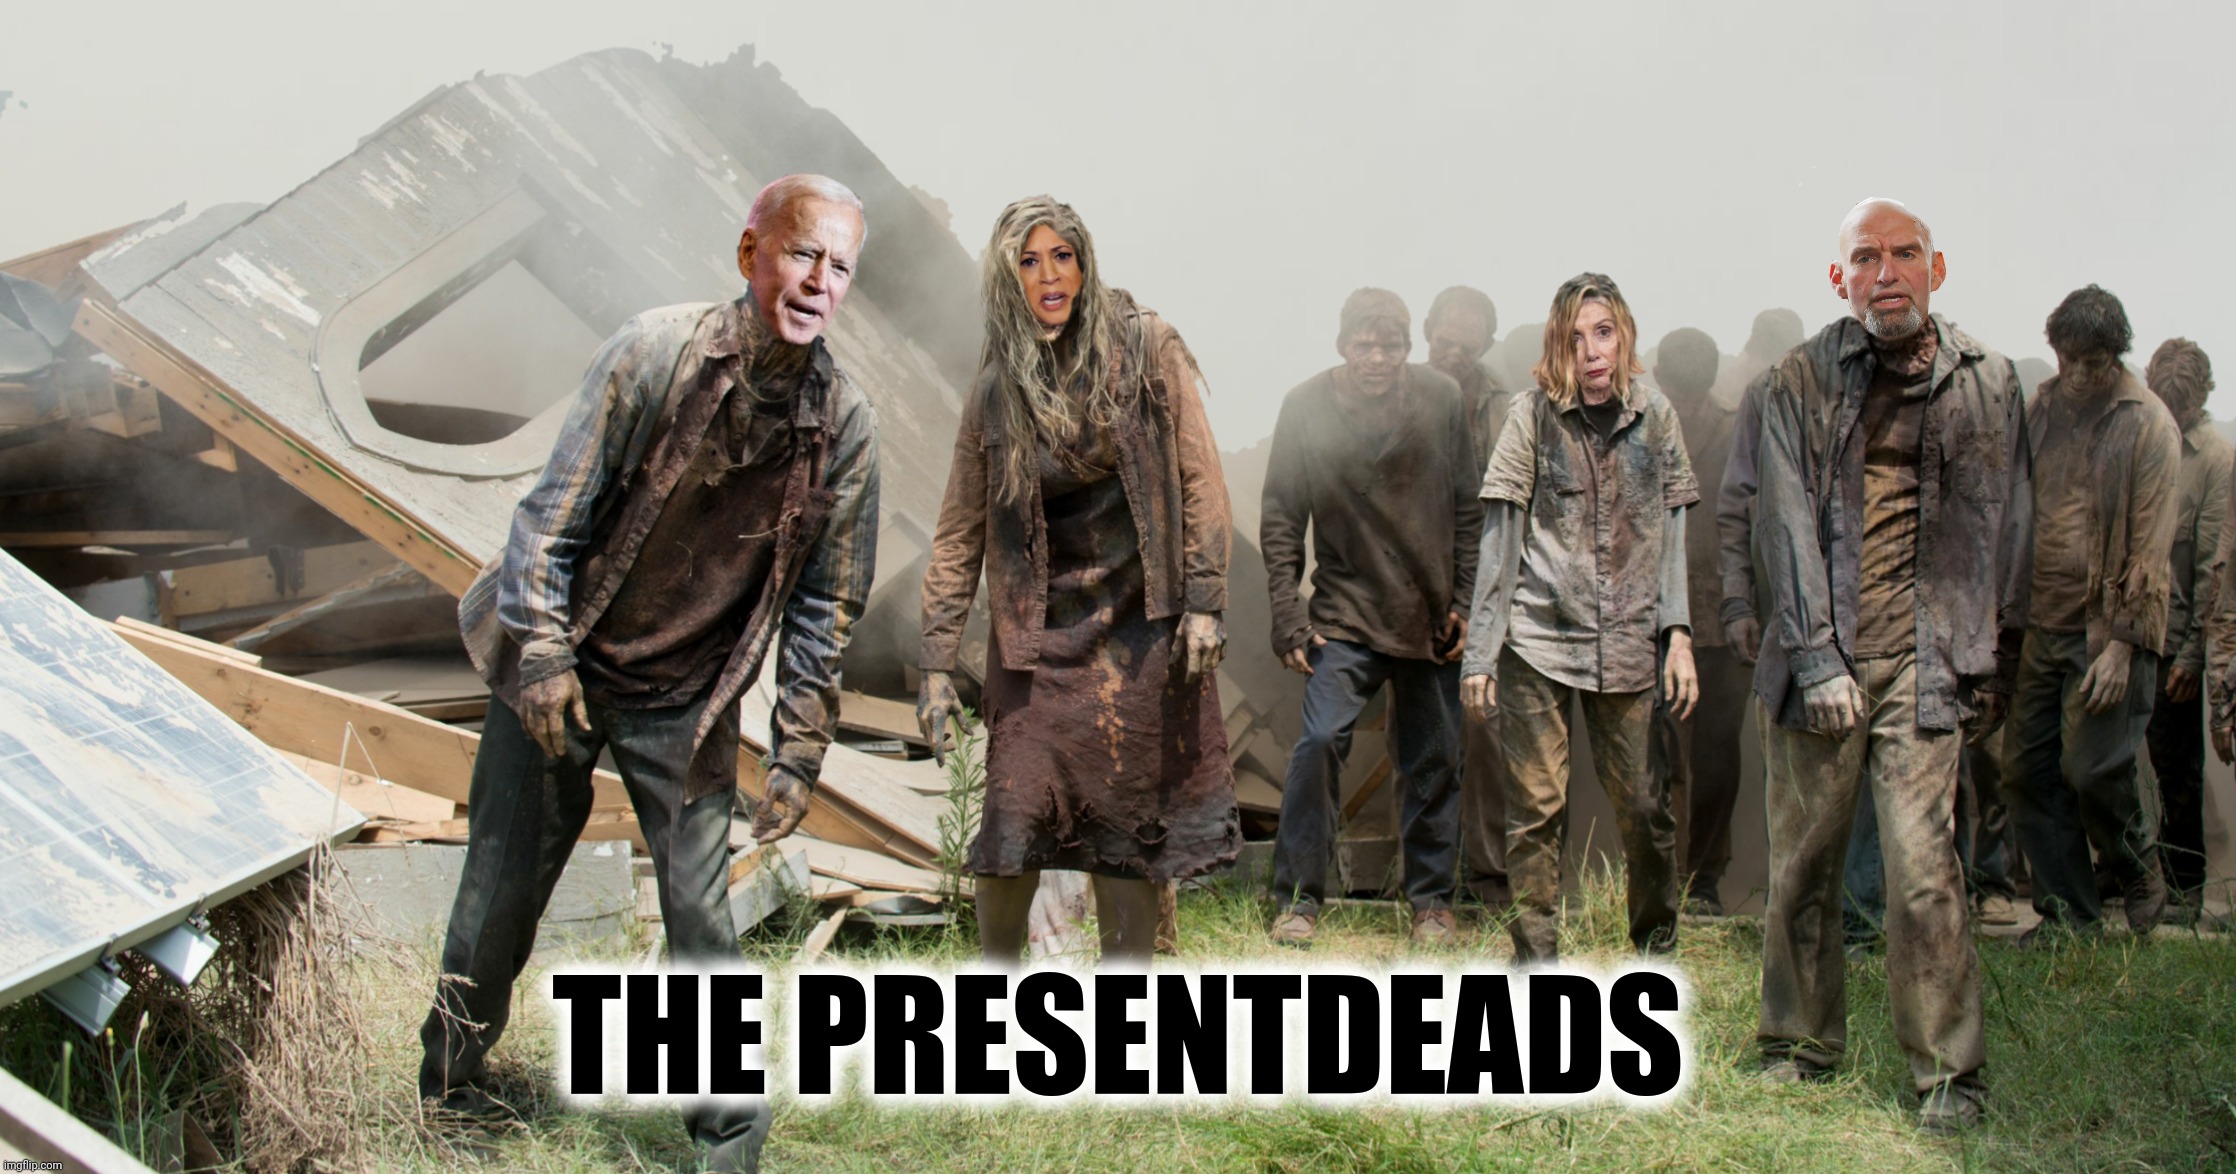 THE PRESENTDEADS | made w/ Imgflip meme maker